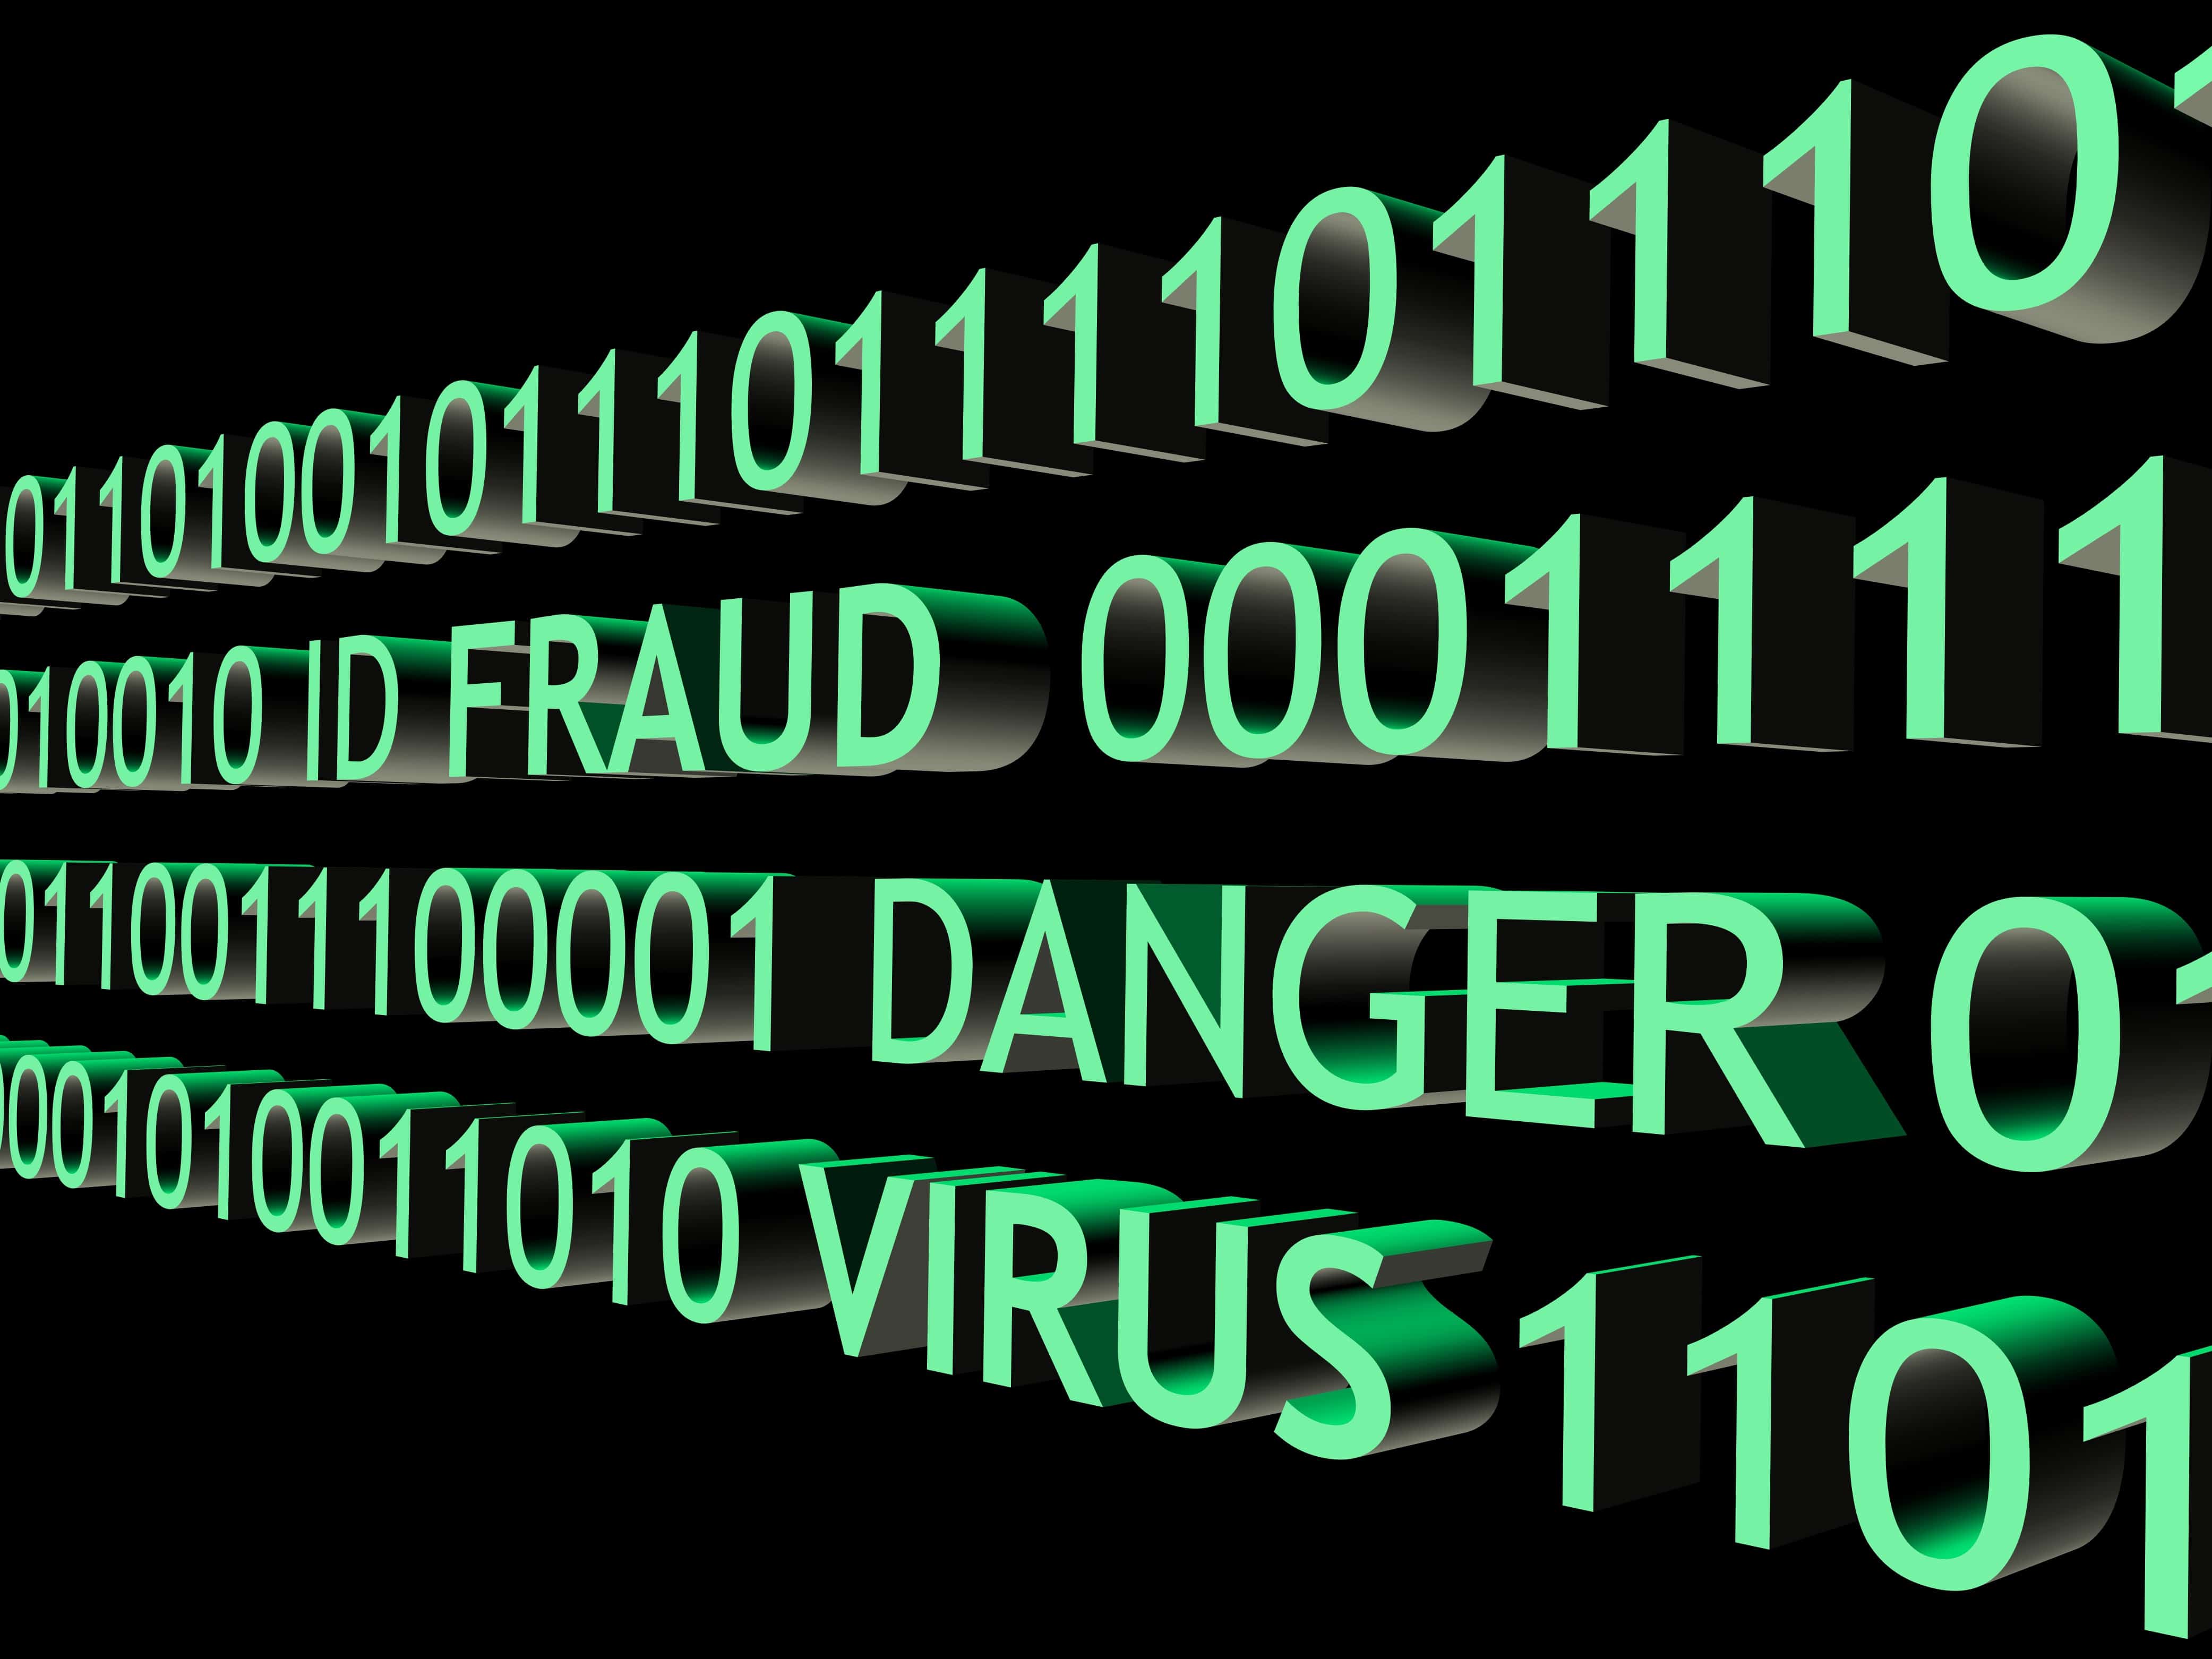 What is Cyber Fraud?